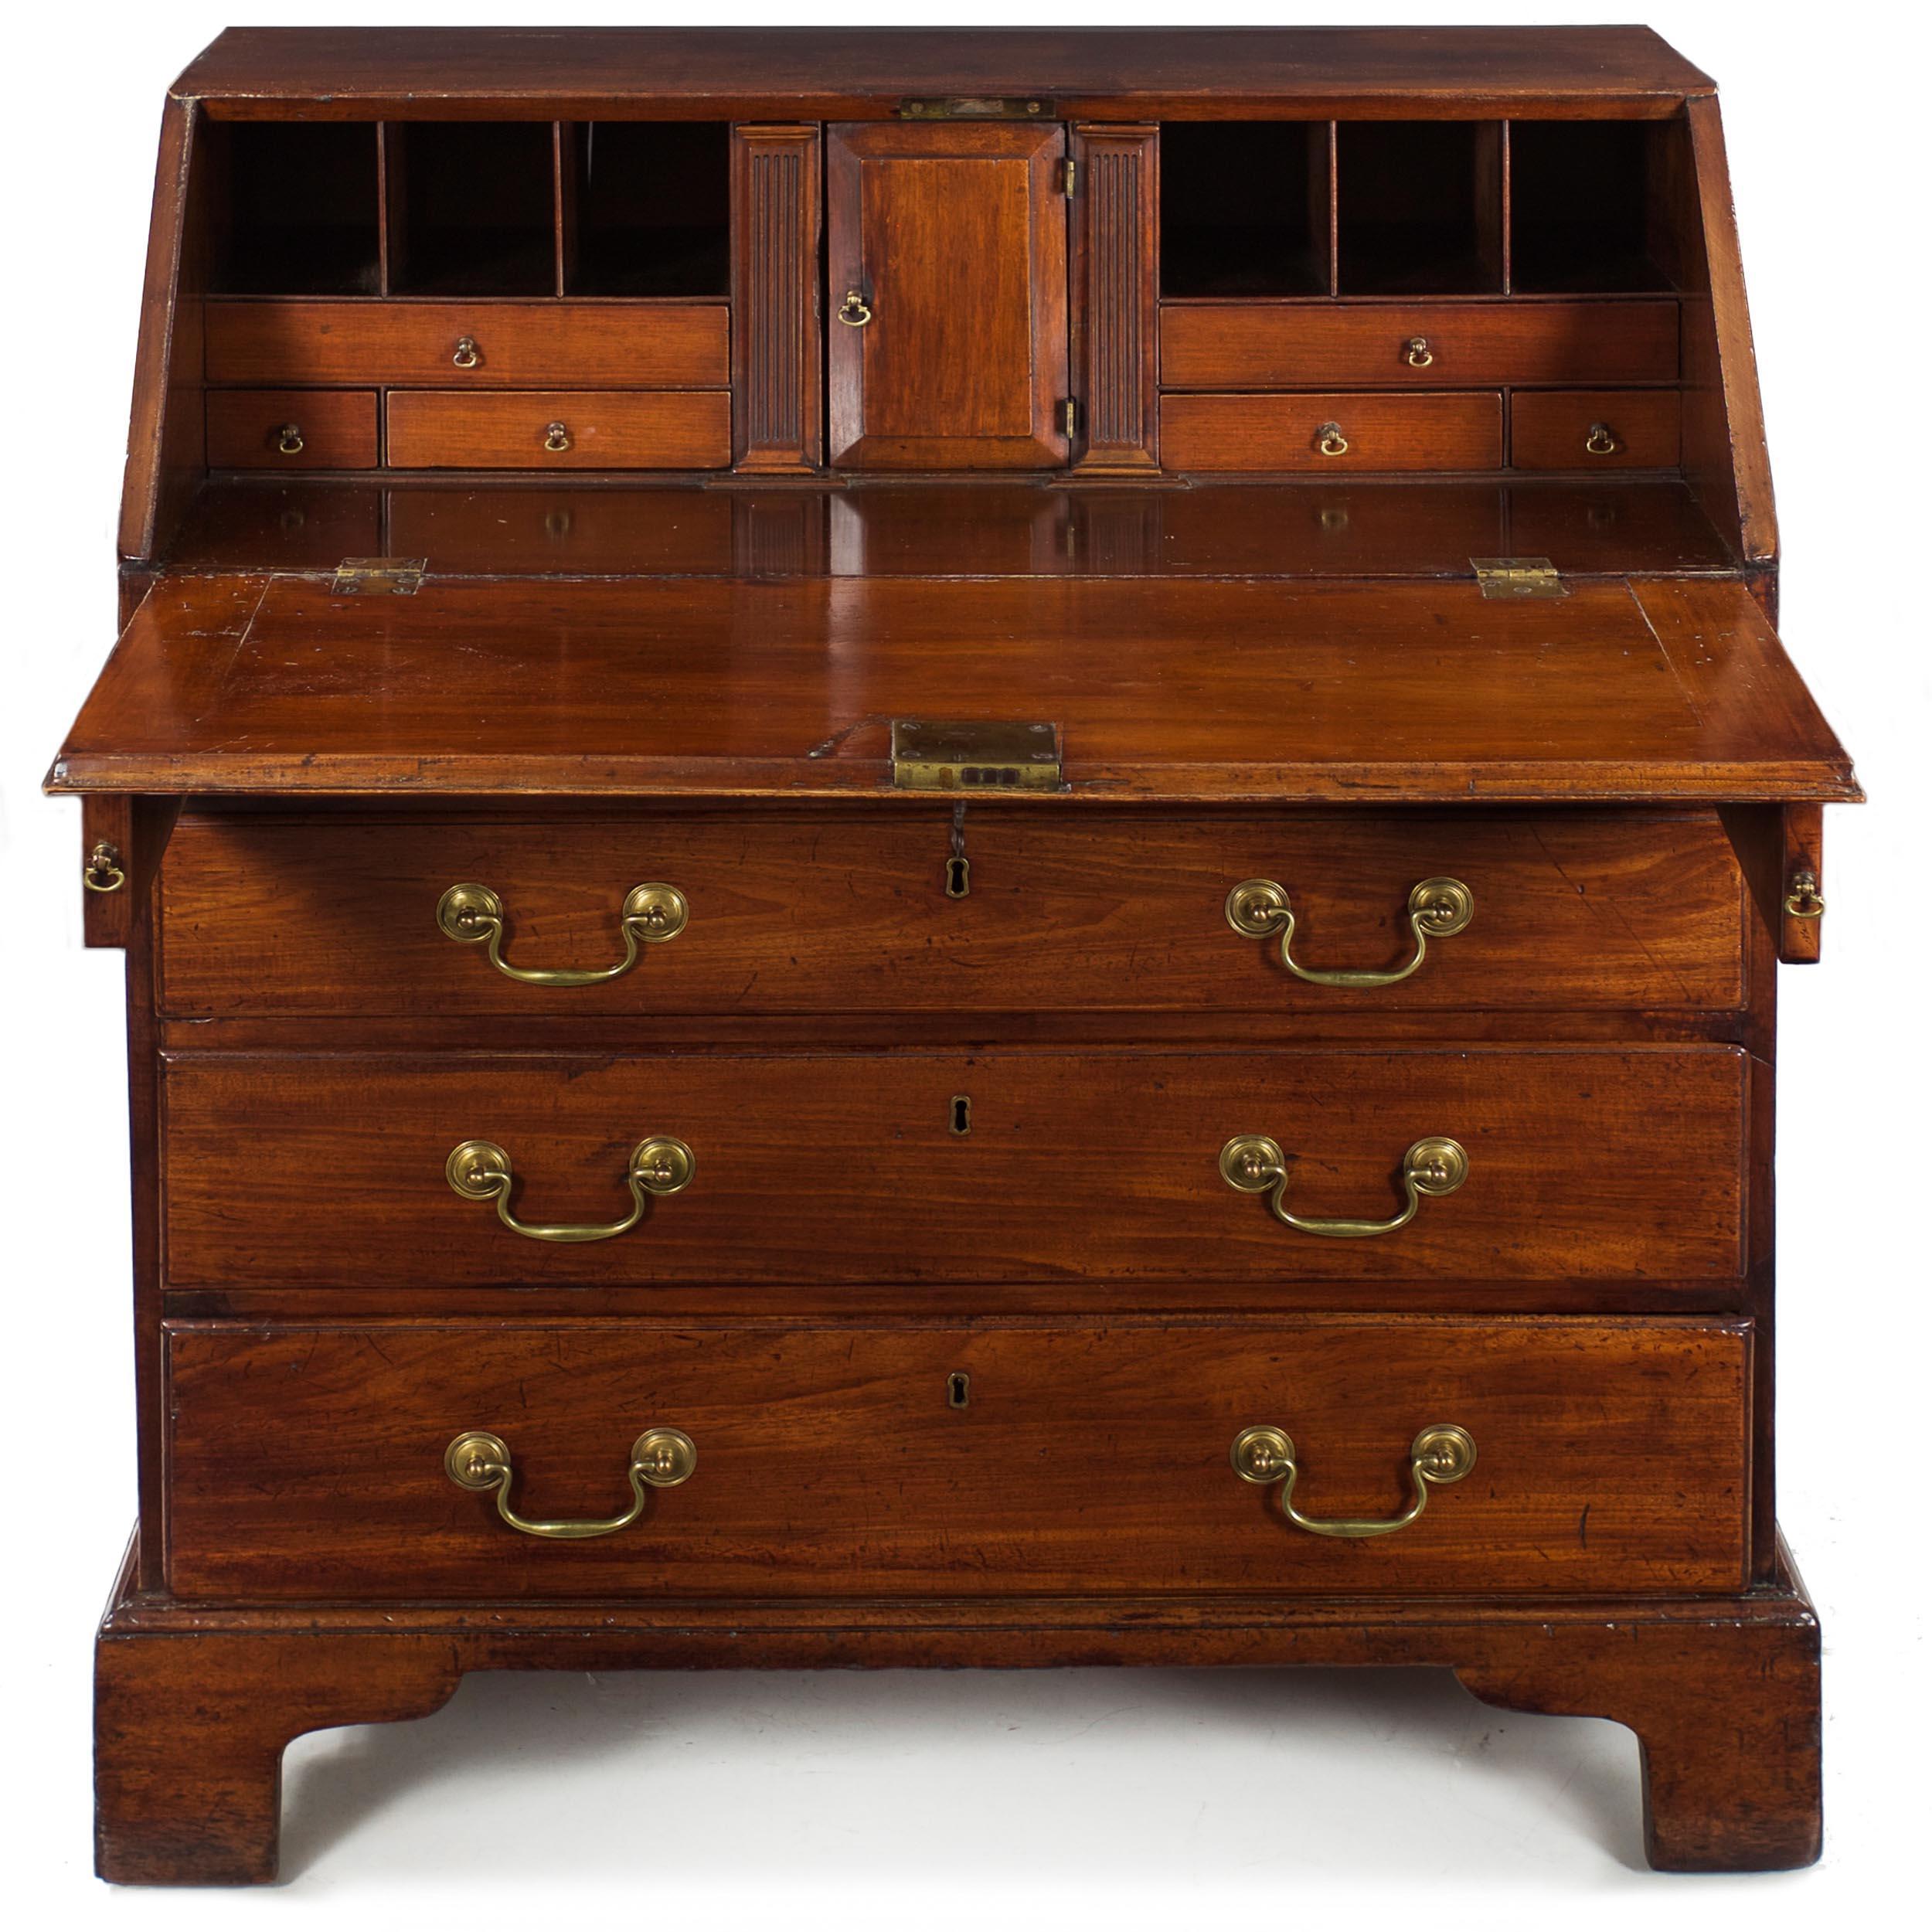 A wonderful George III period slant-front desk executed in dense well-figured mahogany primary woods, it retains a fine overall surface patina under old shellac that has developed a silky texture from years of handling and waxing. The writing